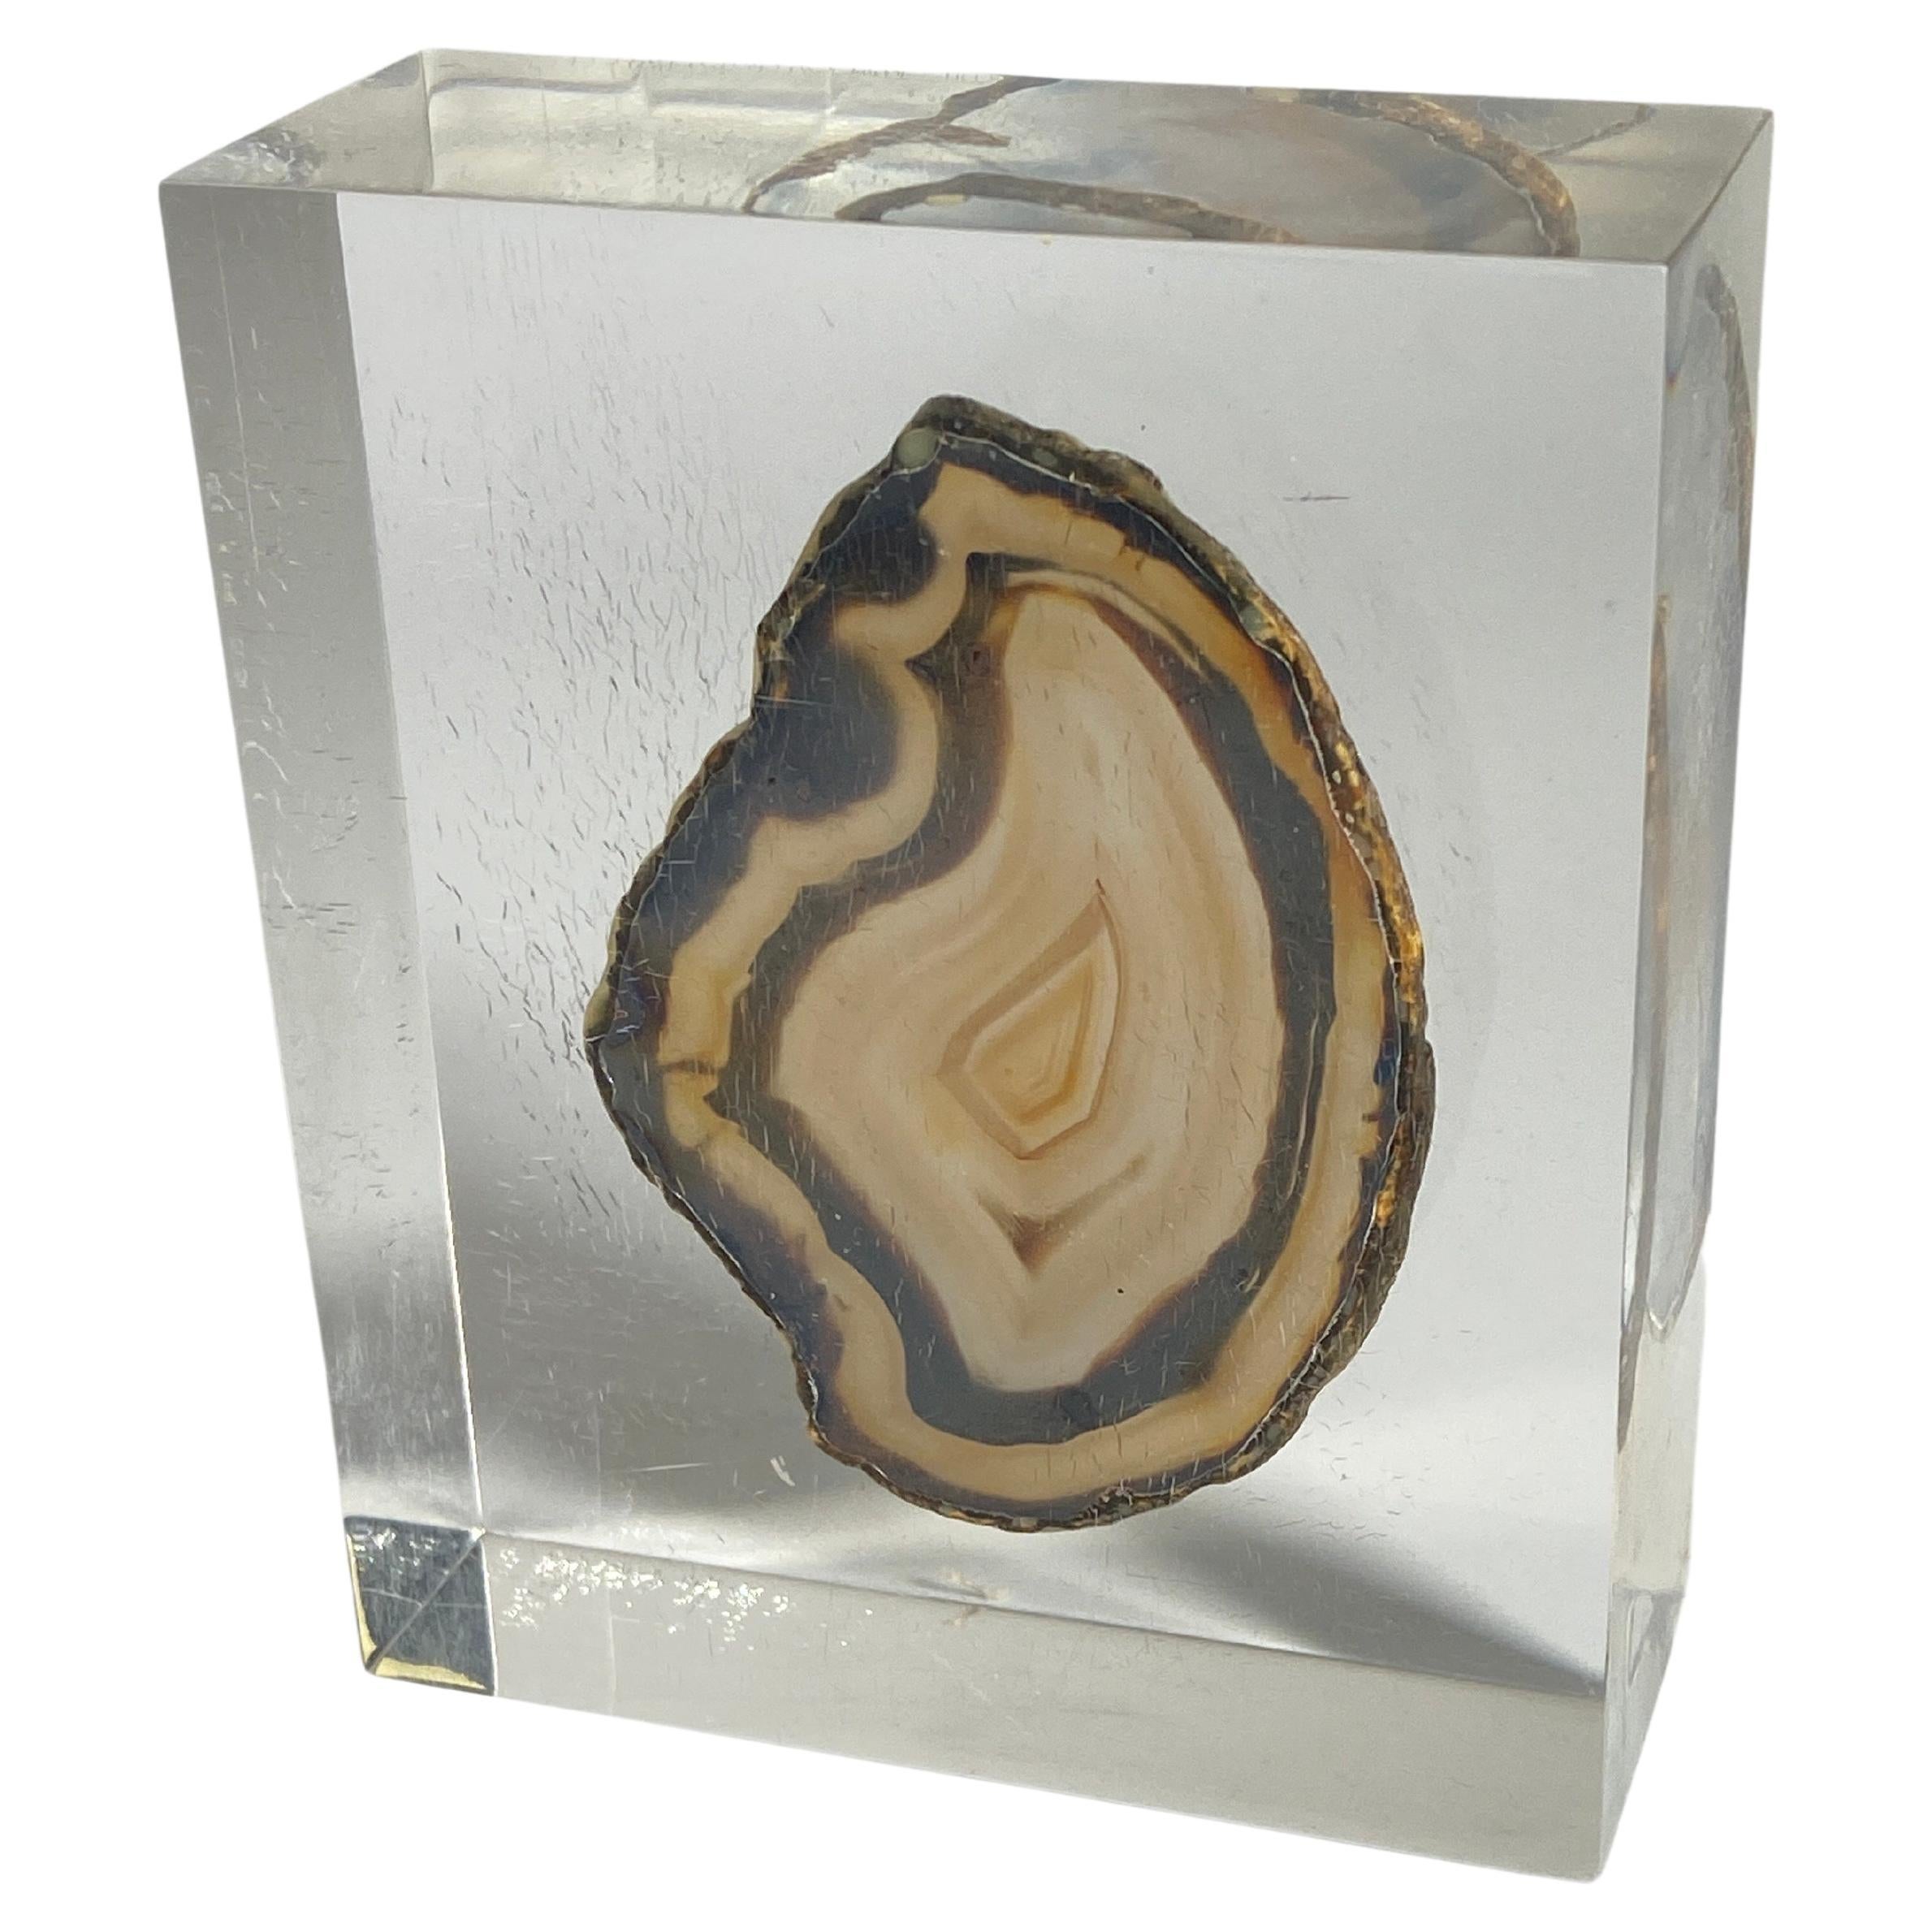 This item is a sculpture, made in France Circa 1970. It is a cube of resin, with in the inside an inclusion of an Agate Stone.